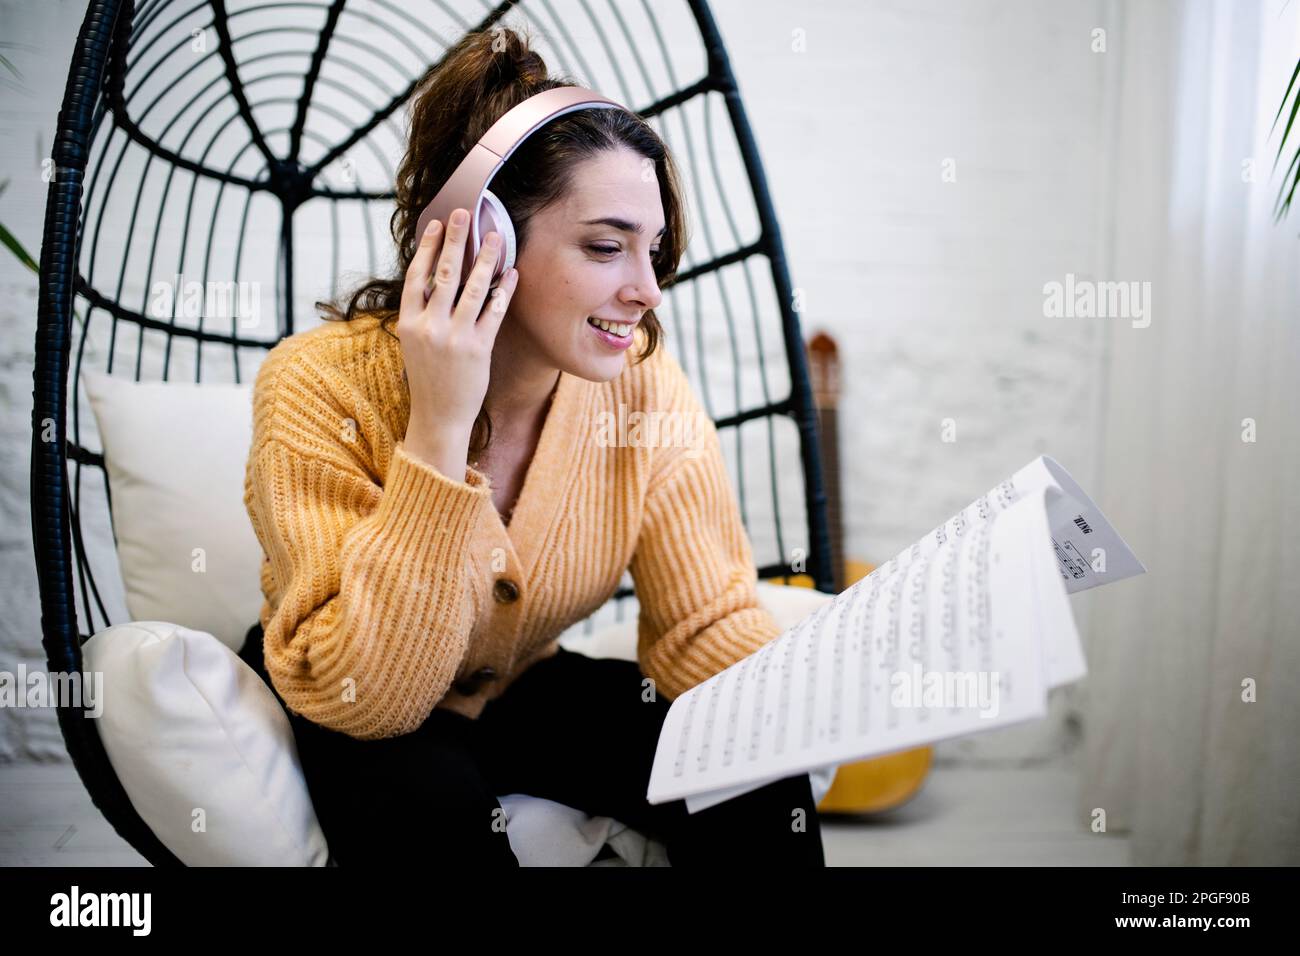 Young Woman with headphones composing music at home Stock Photo